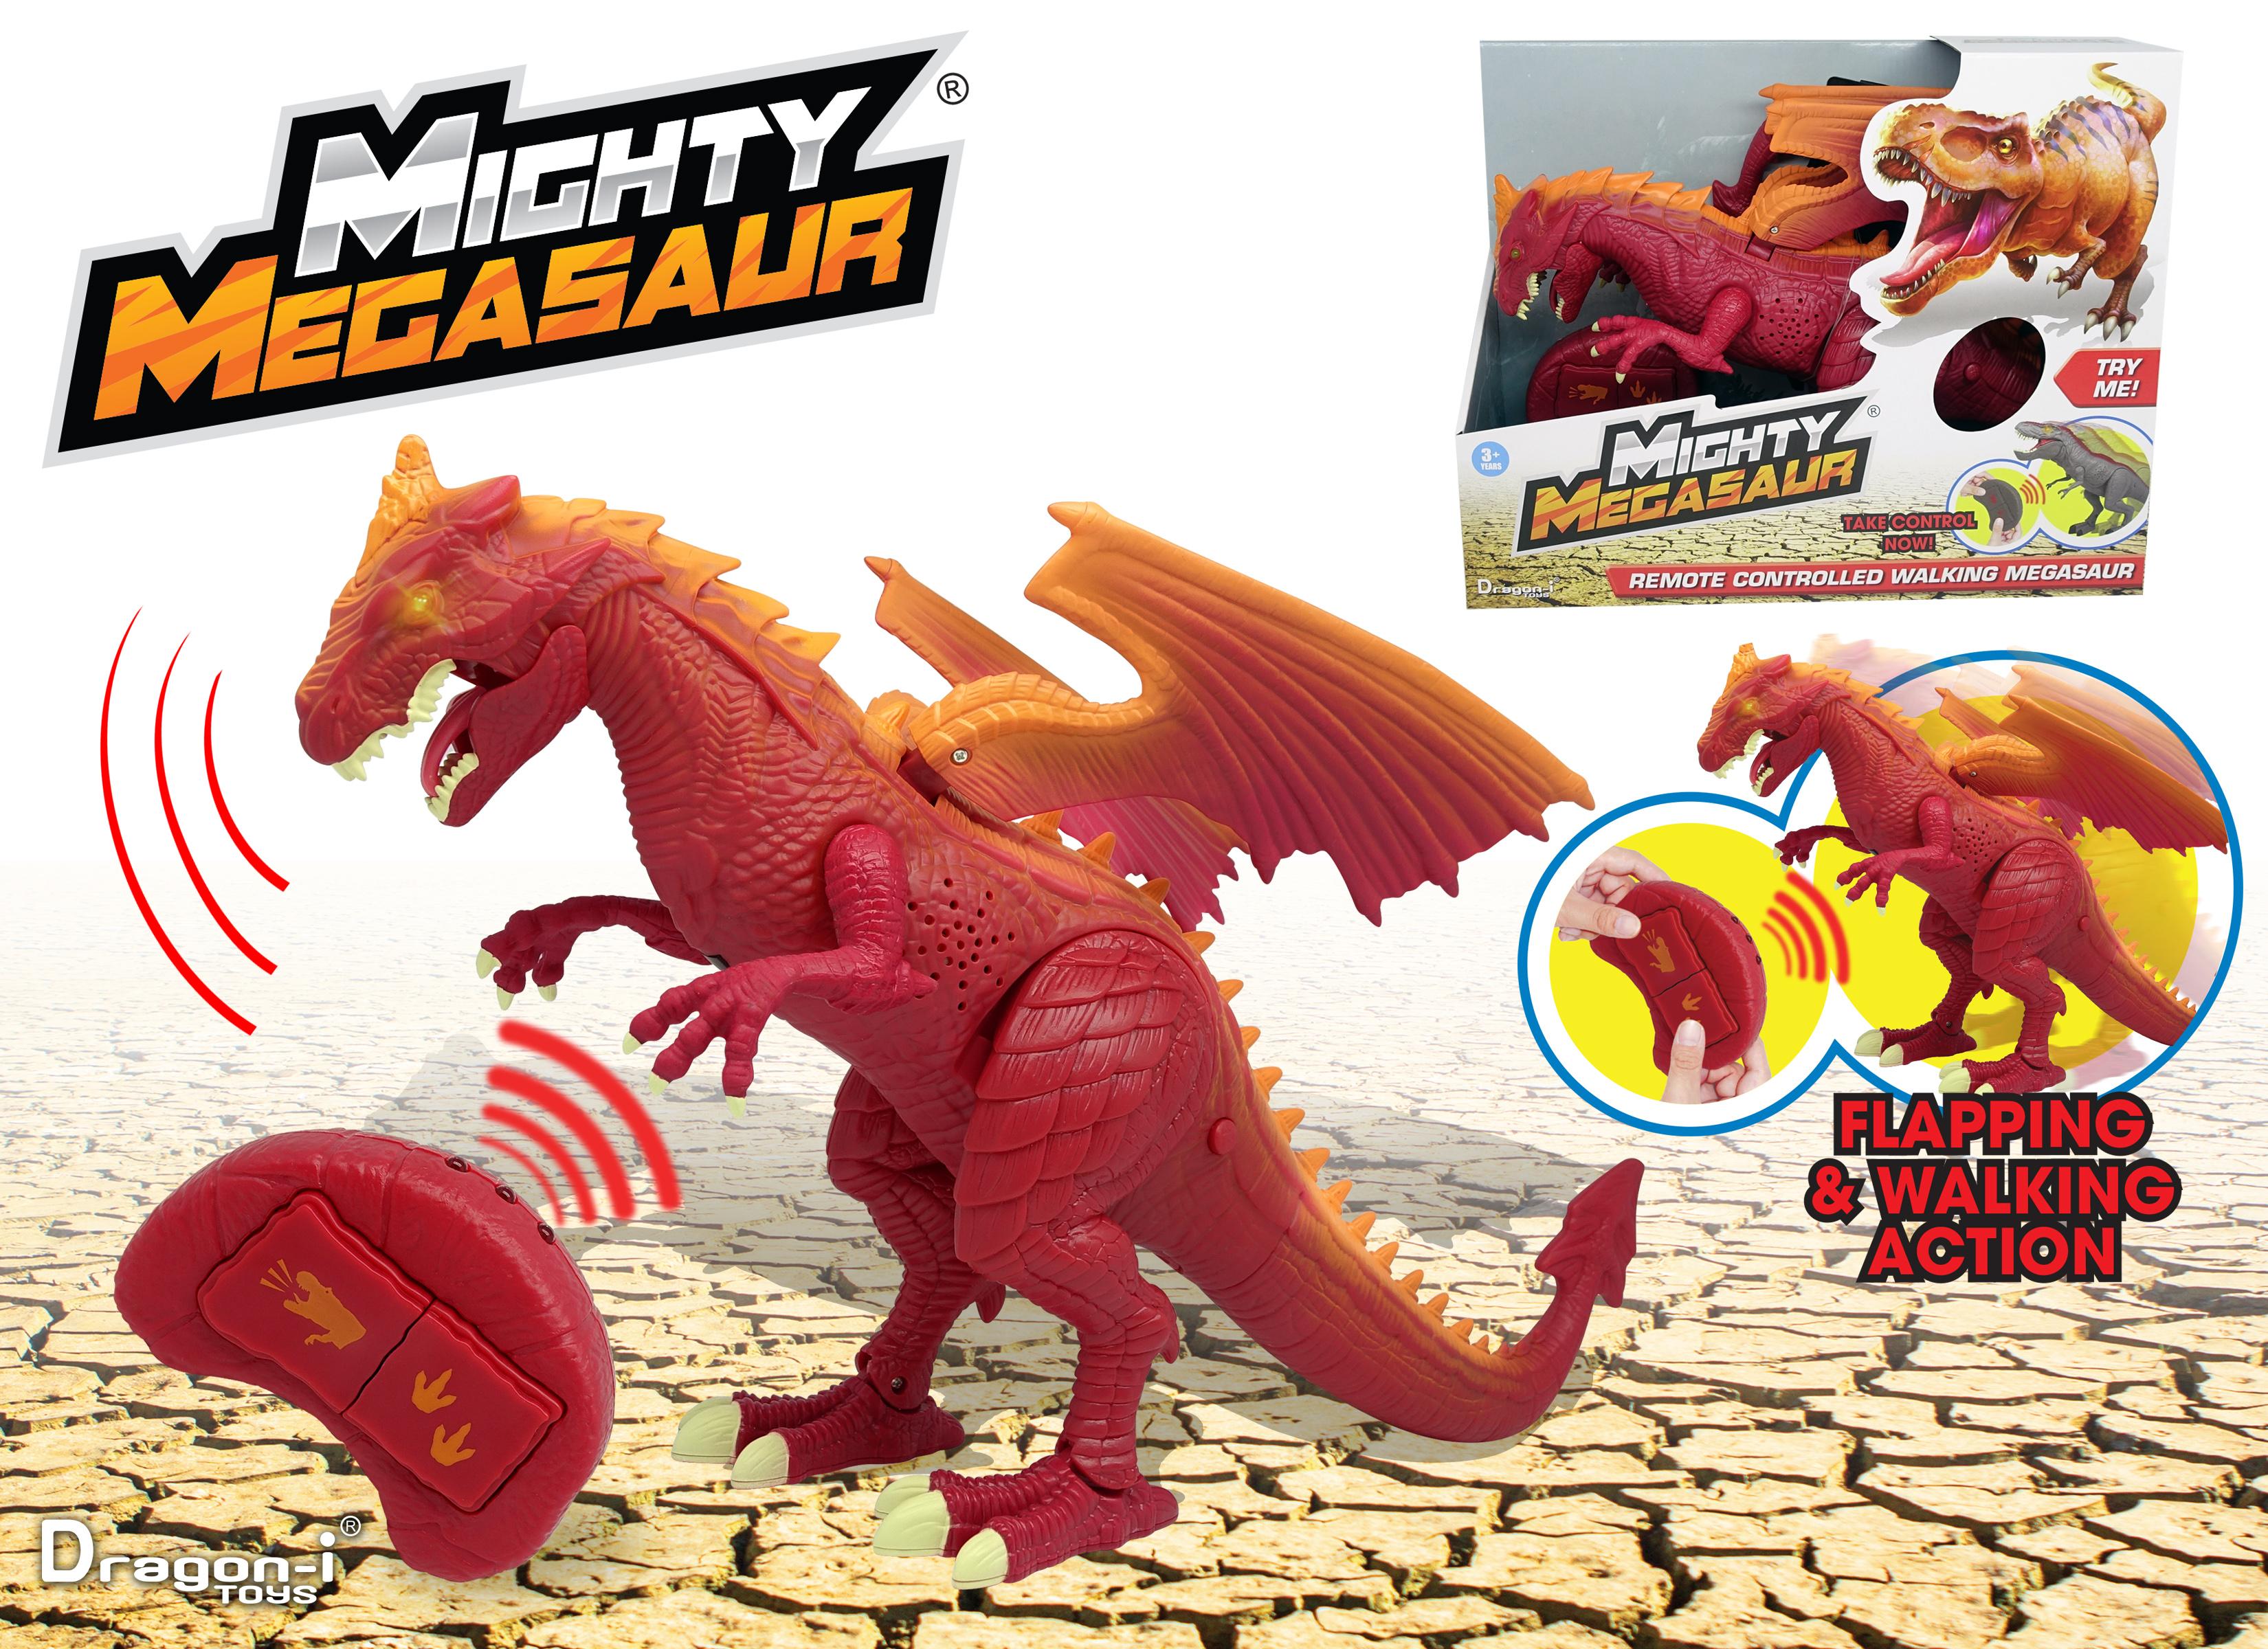 Mighty Megasaur Battery Operated Infra-Red Controlled Walking Dragon